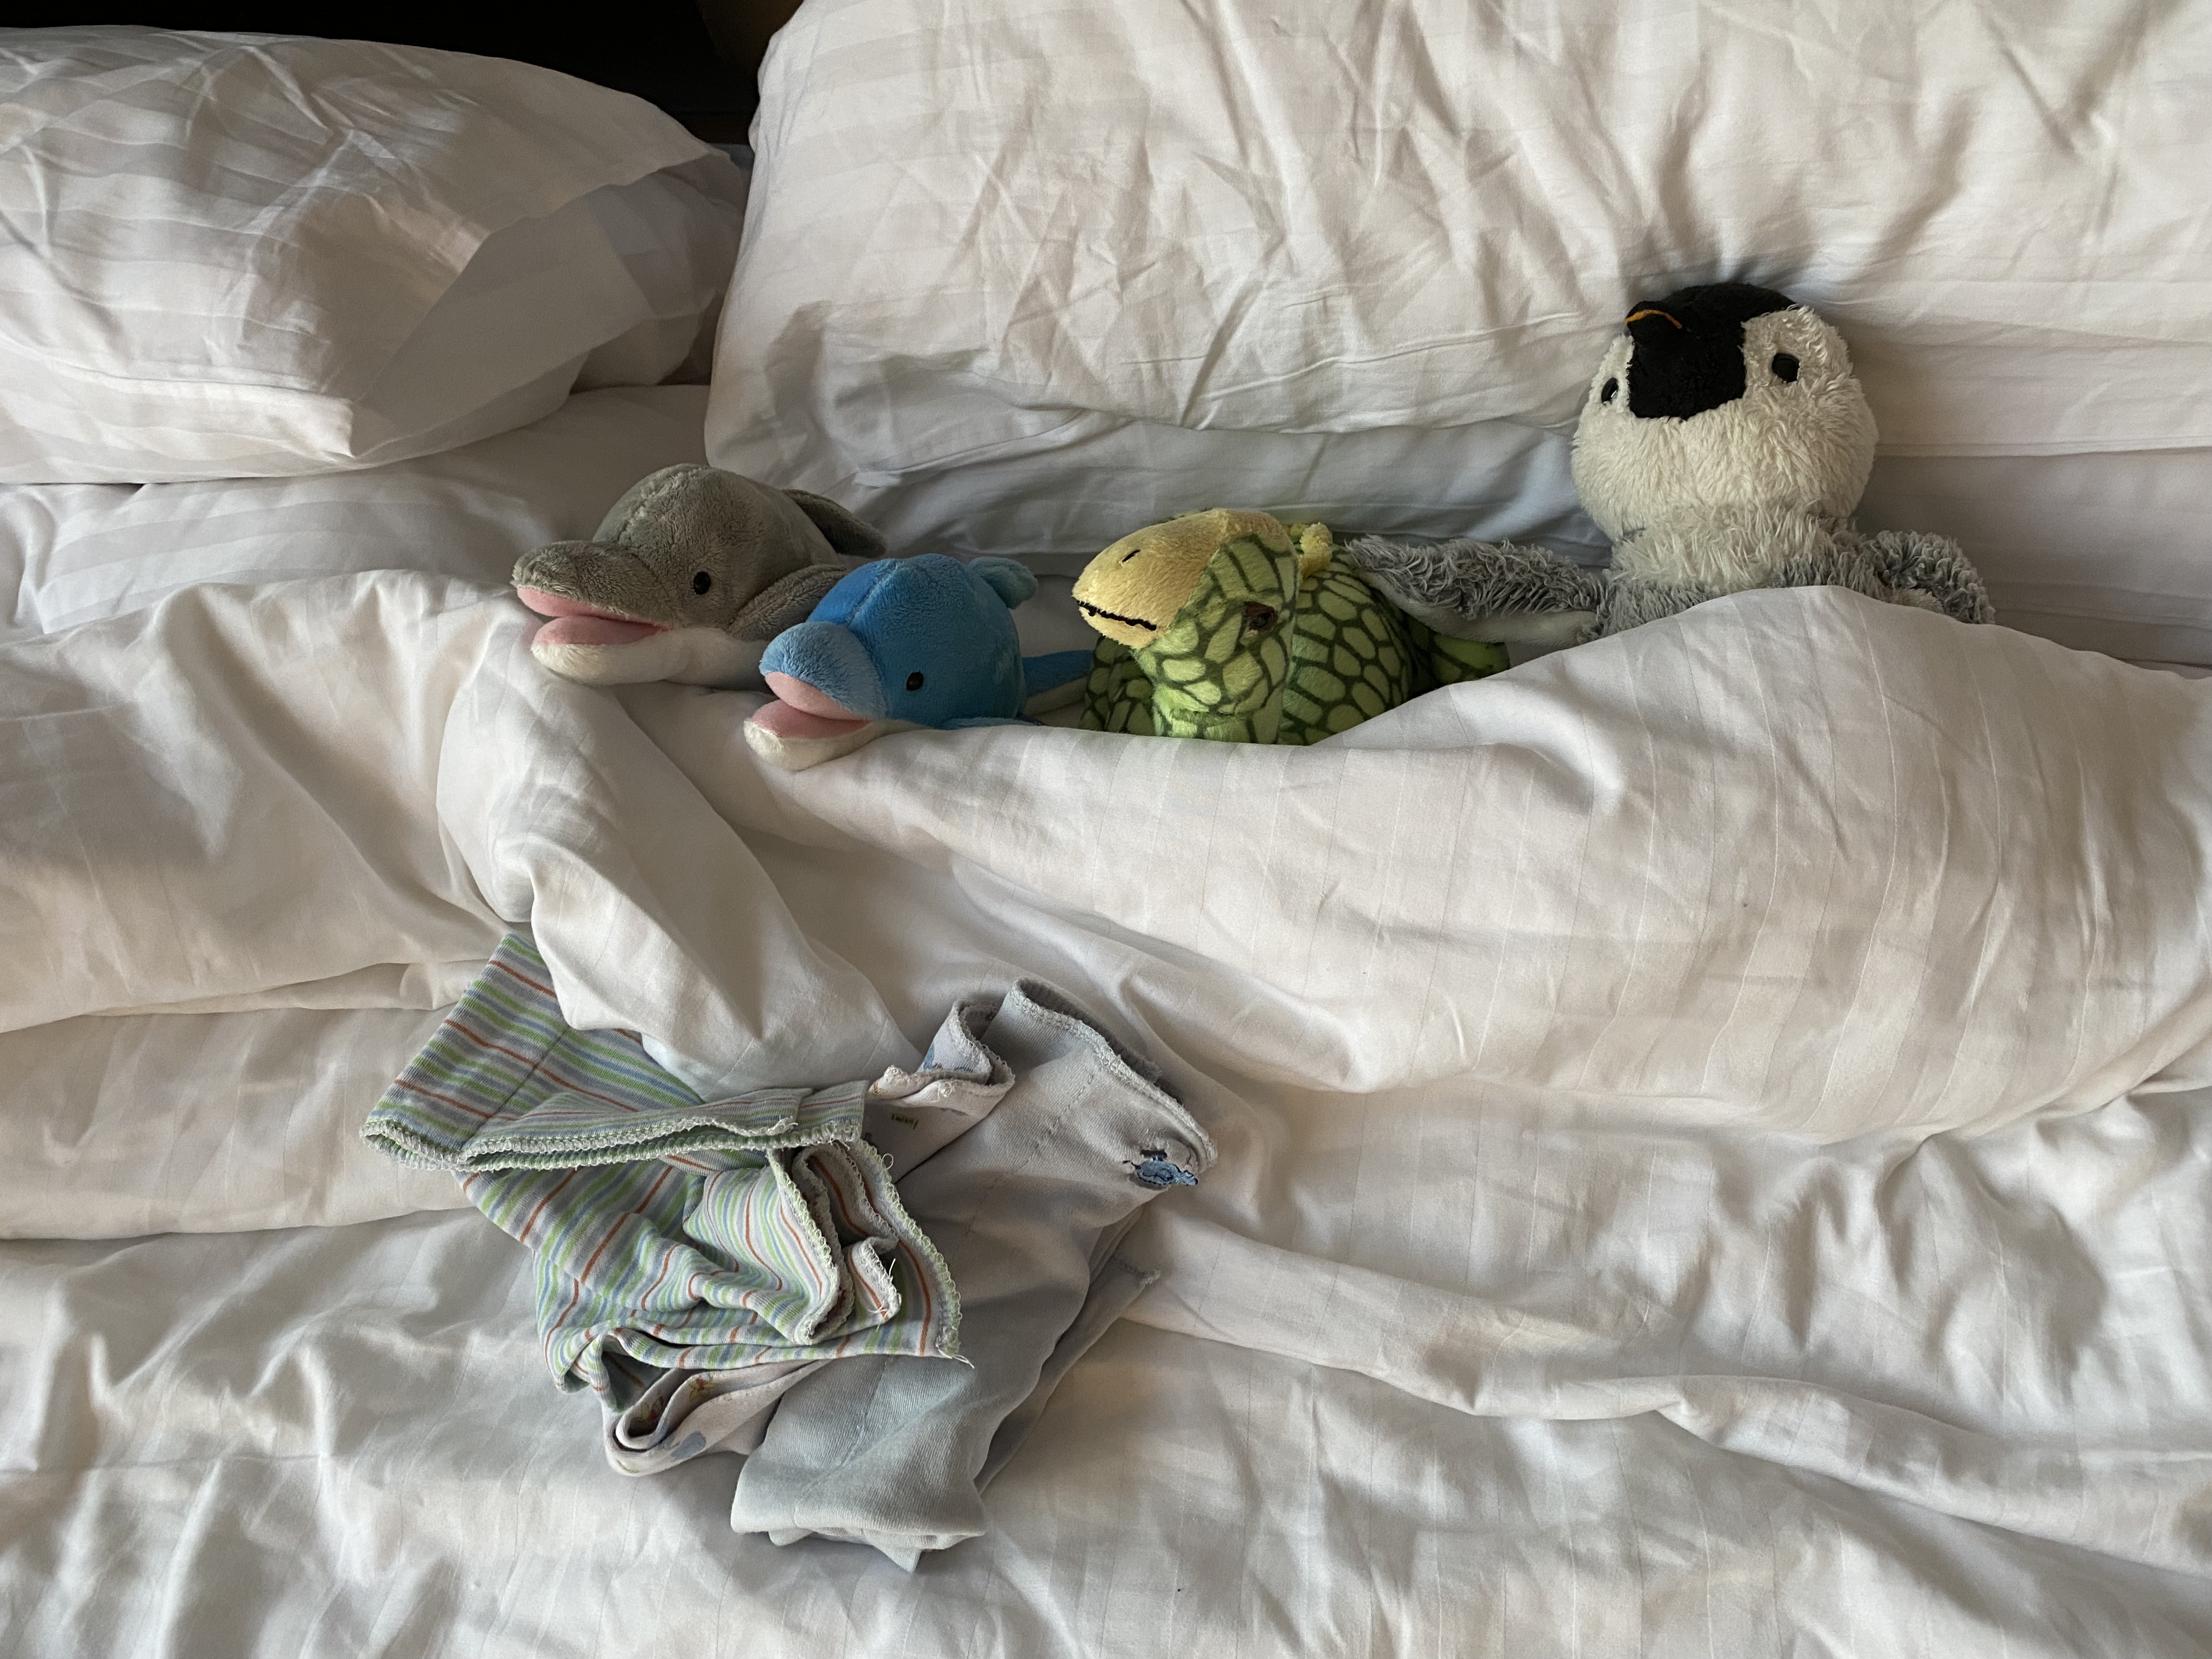 Stuffed animals in bed